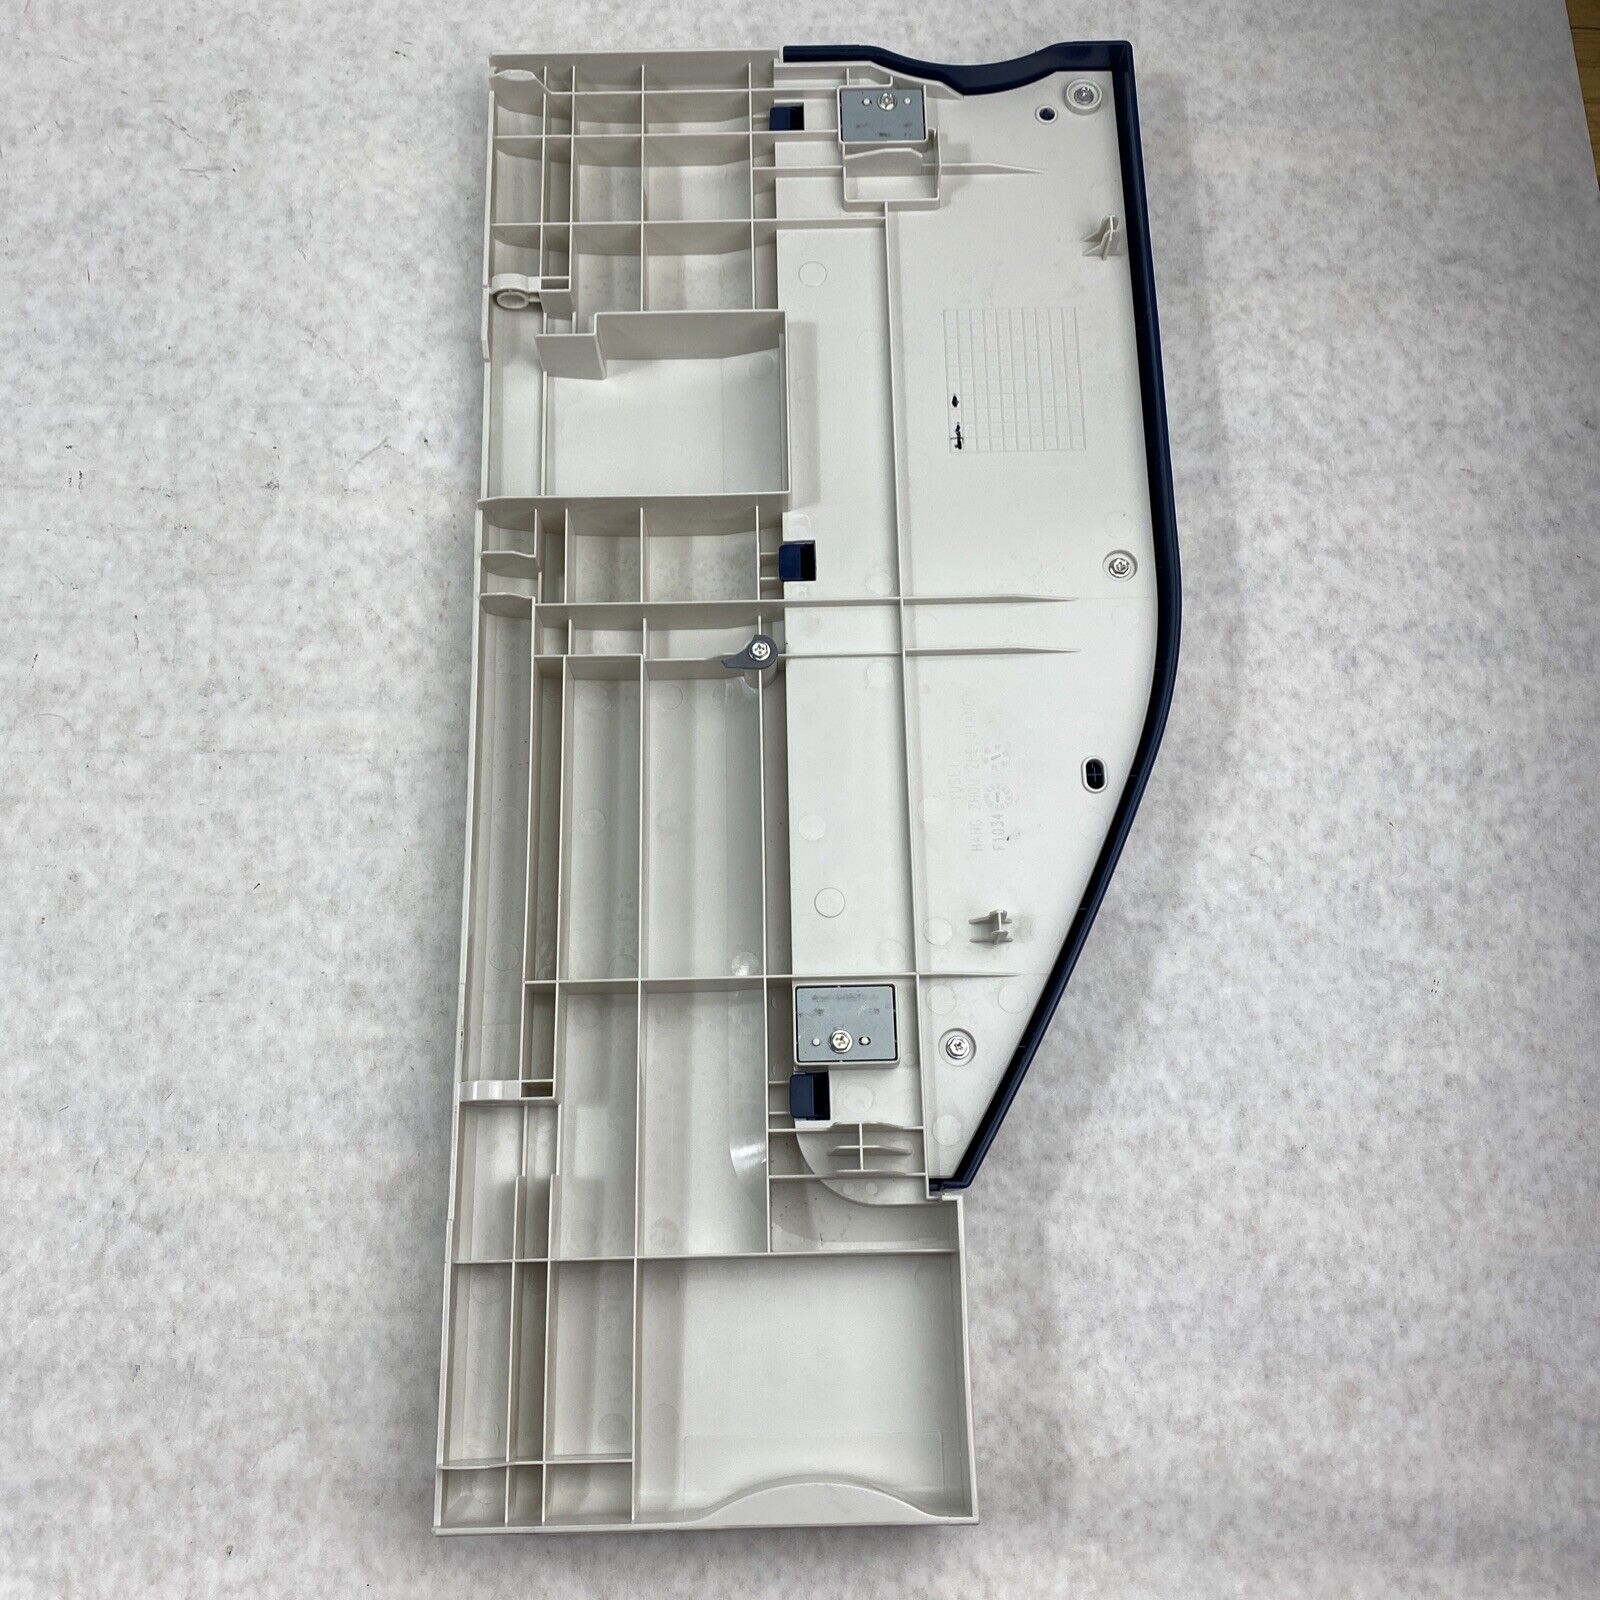 Xerox WorkCentre 5335 Front Cover for Toner and Drum Access